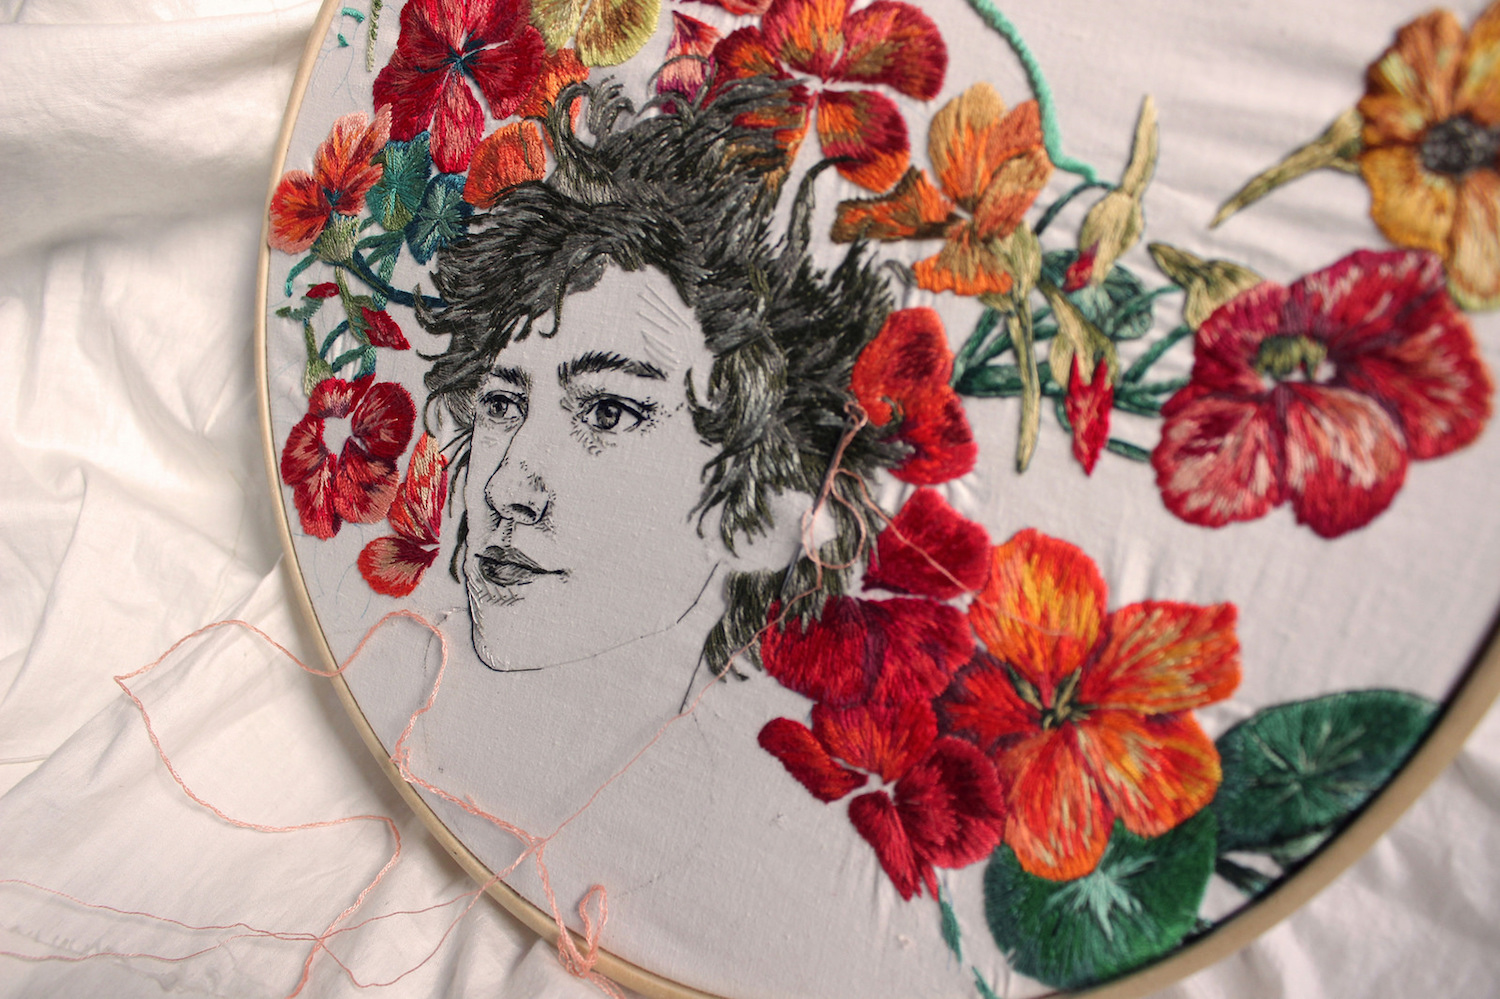 Embroidery by Sol Kesseler